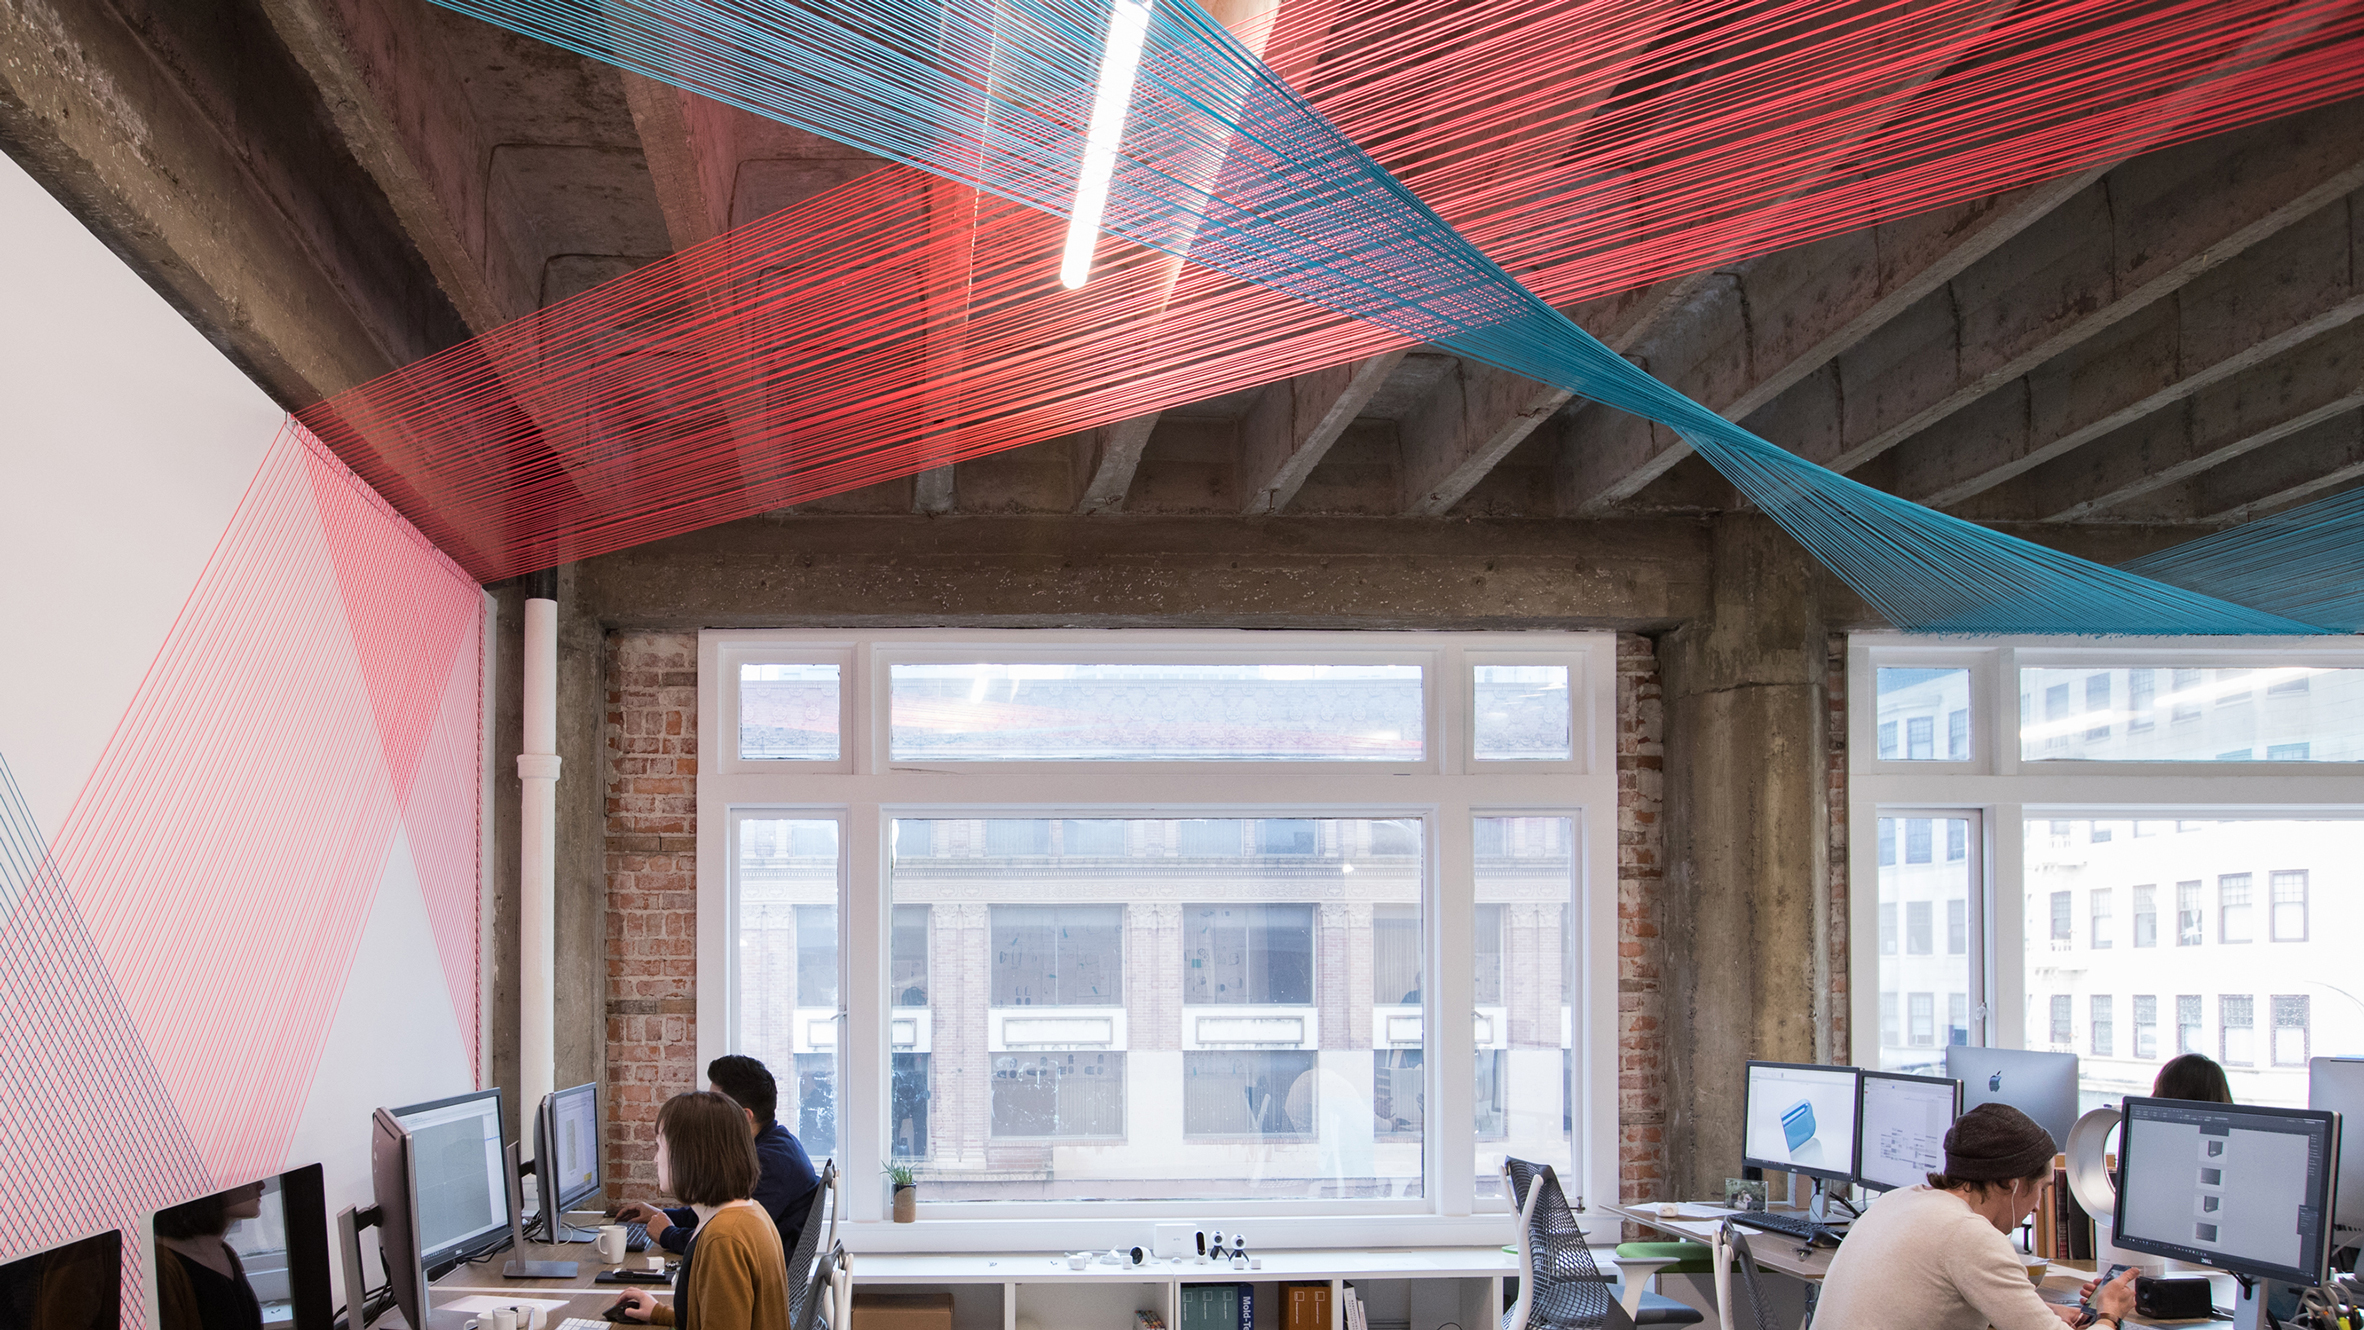 Colourful strings weave through offices of Californian design agency